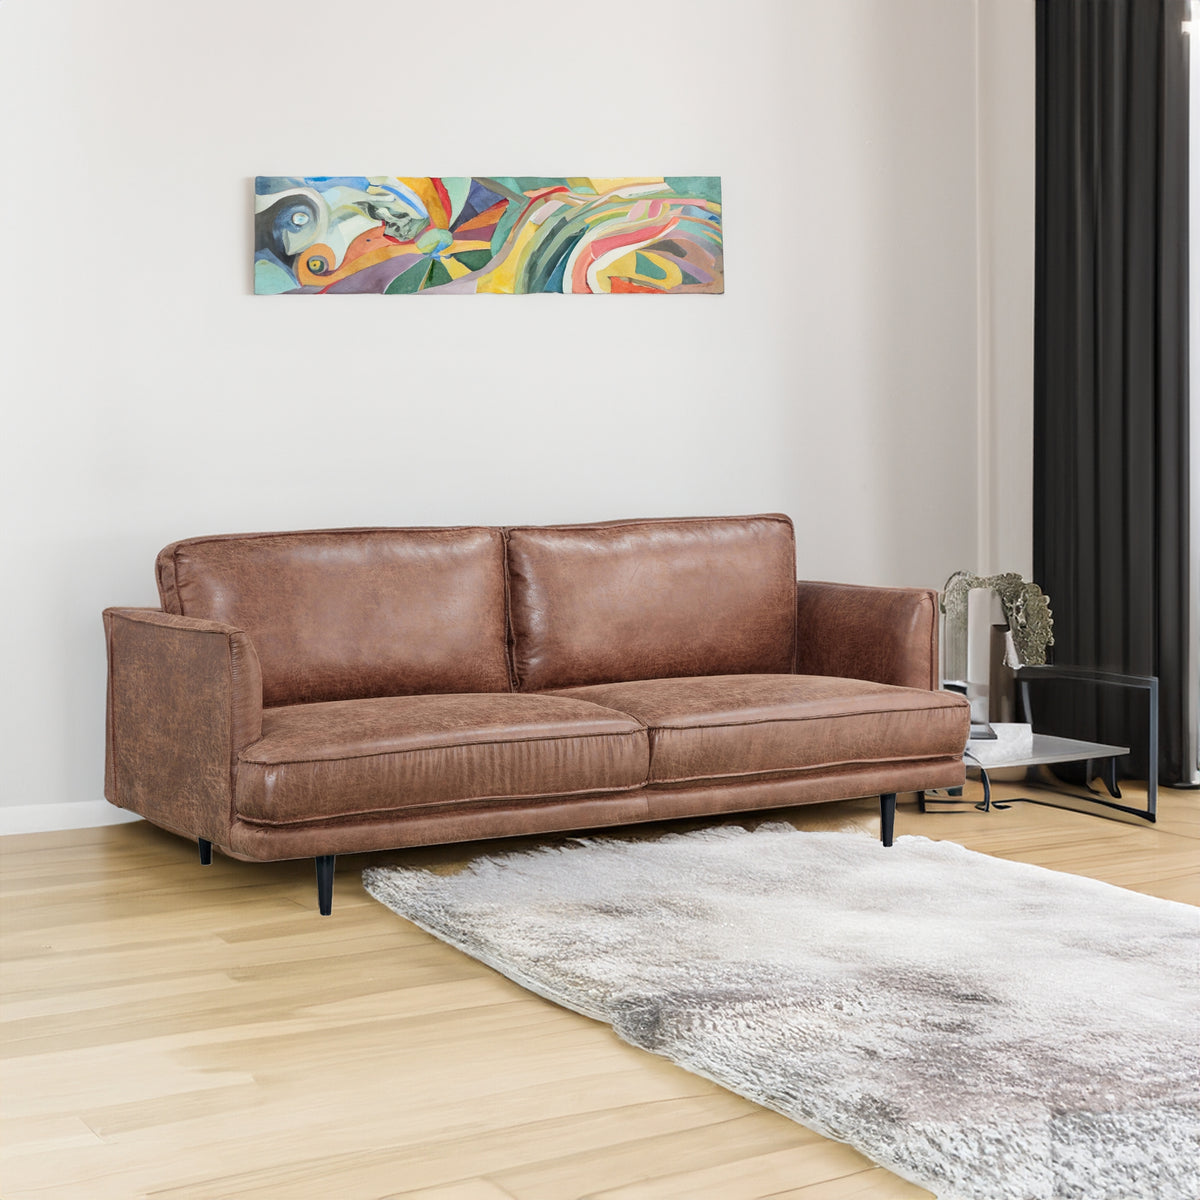 Rosie Fabric Sofa 2 Seater Brown